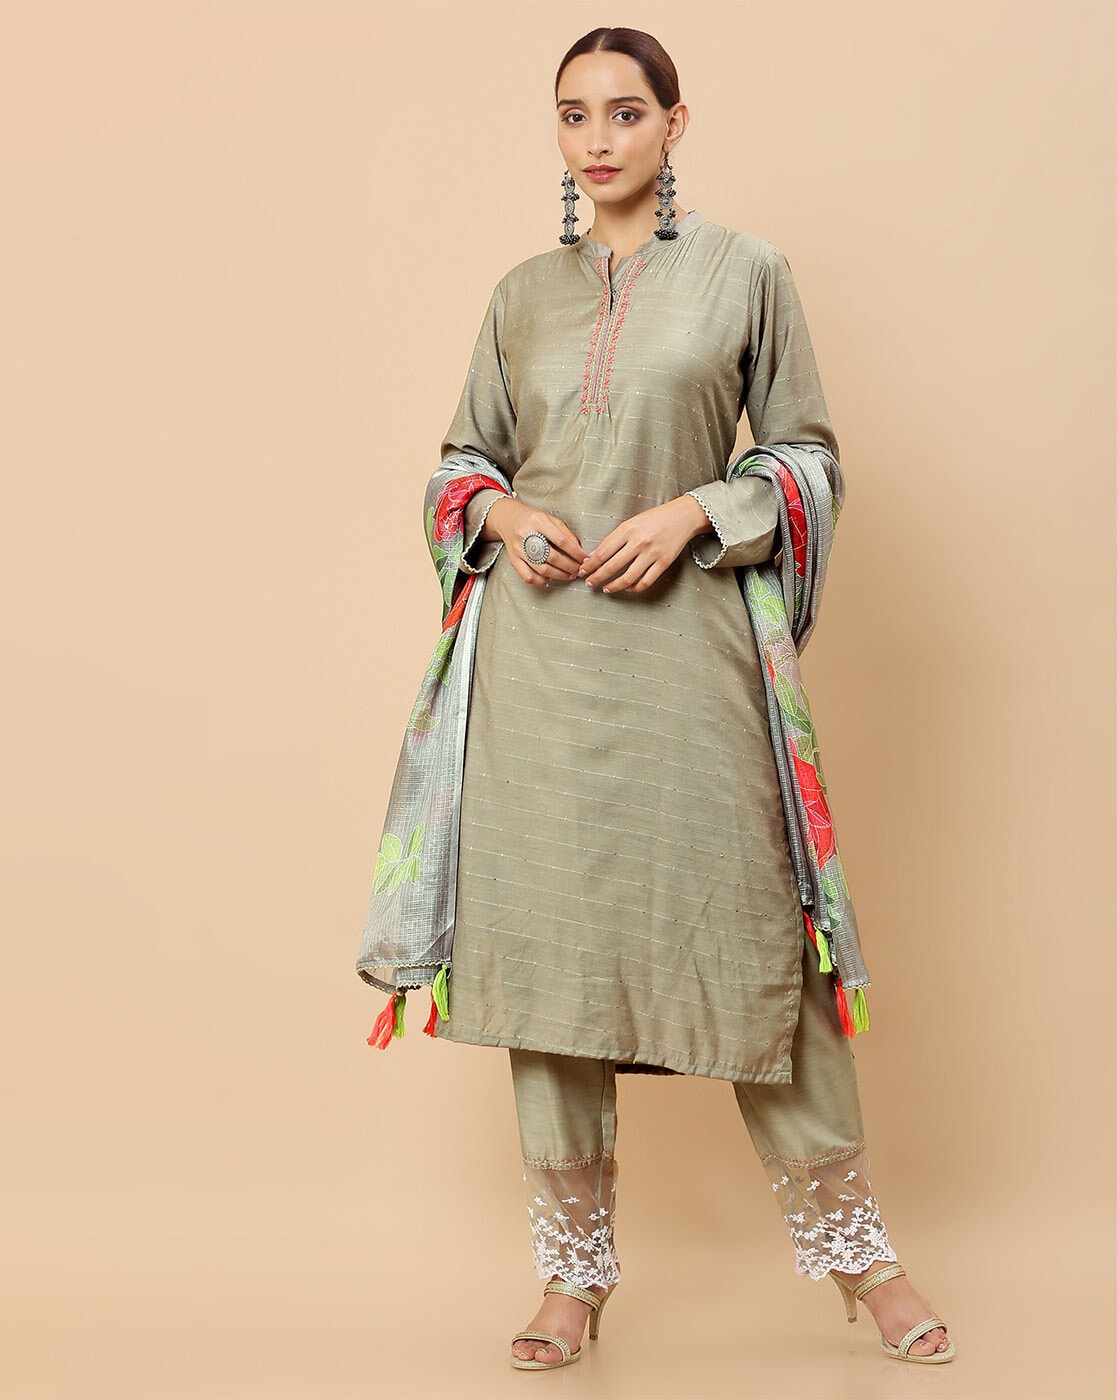 Soch - Elegant Kurti Suits for a fresh look at your next... | Facebook